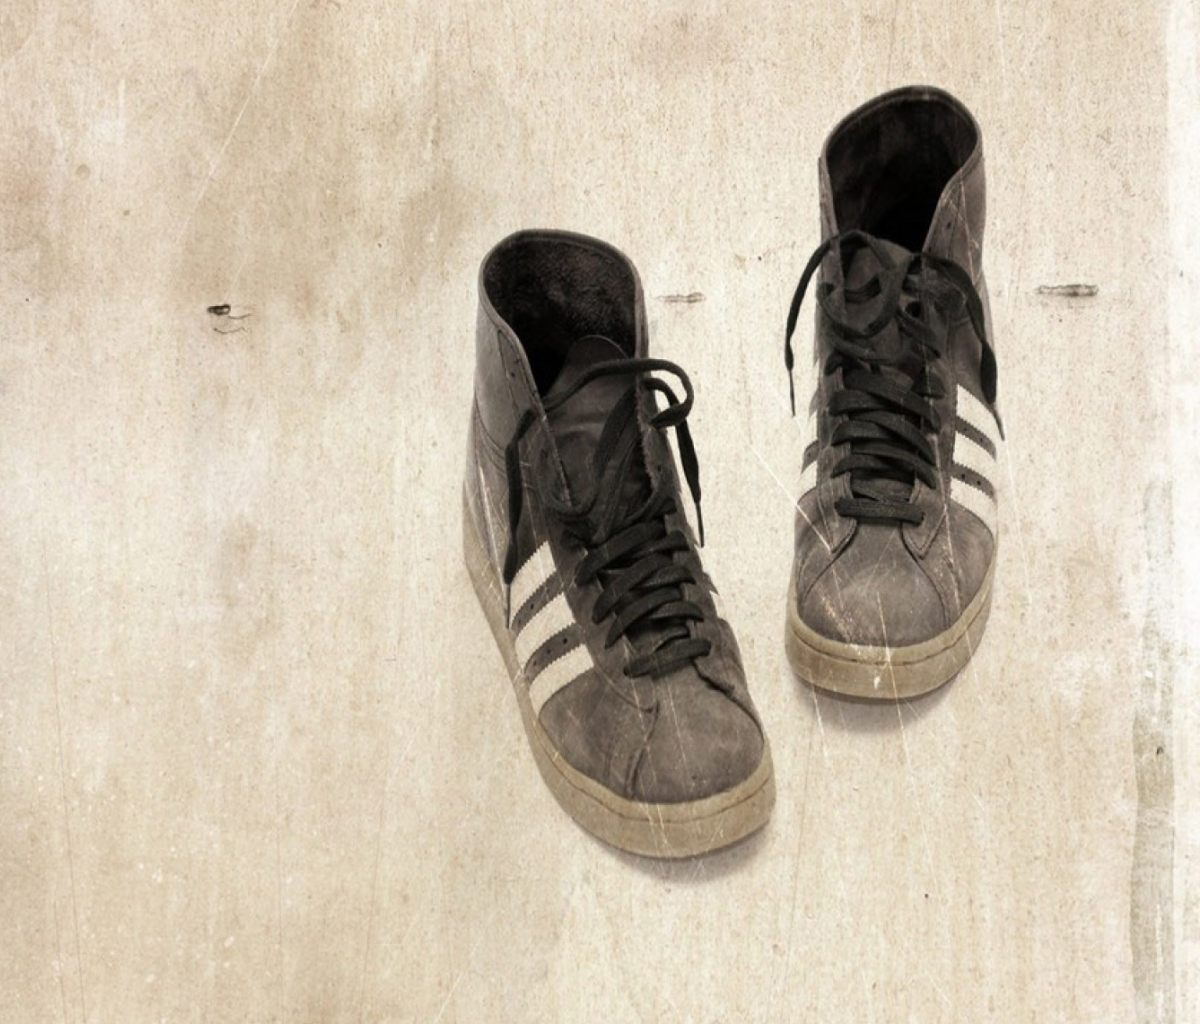 Grungy Sneakers wallpaper 1200x1024